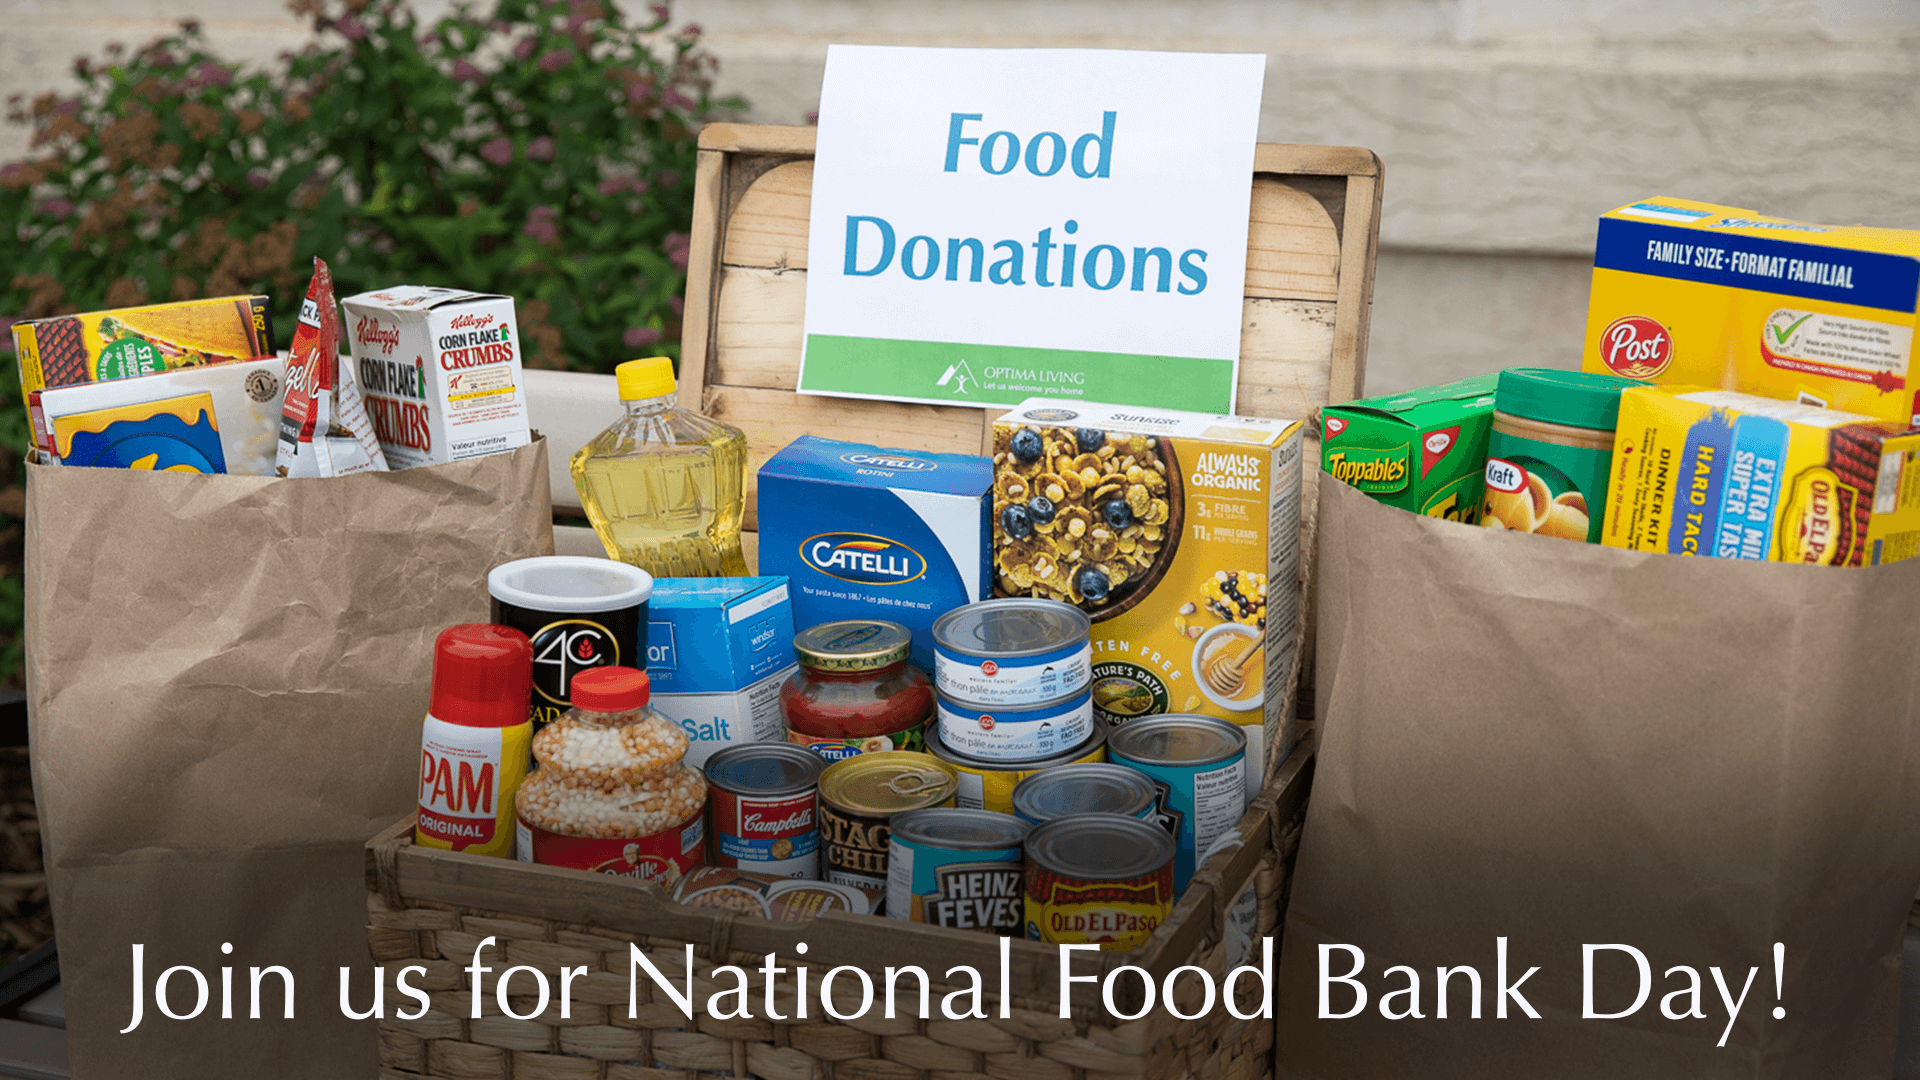 A basket with non-perishable food items for food donations